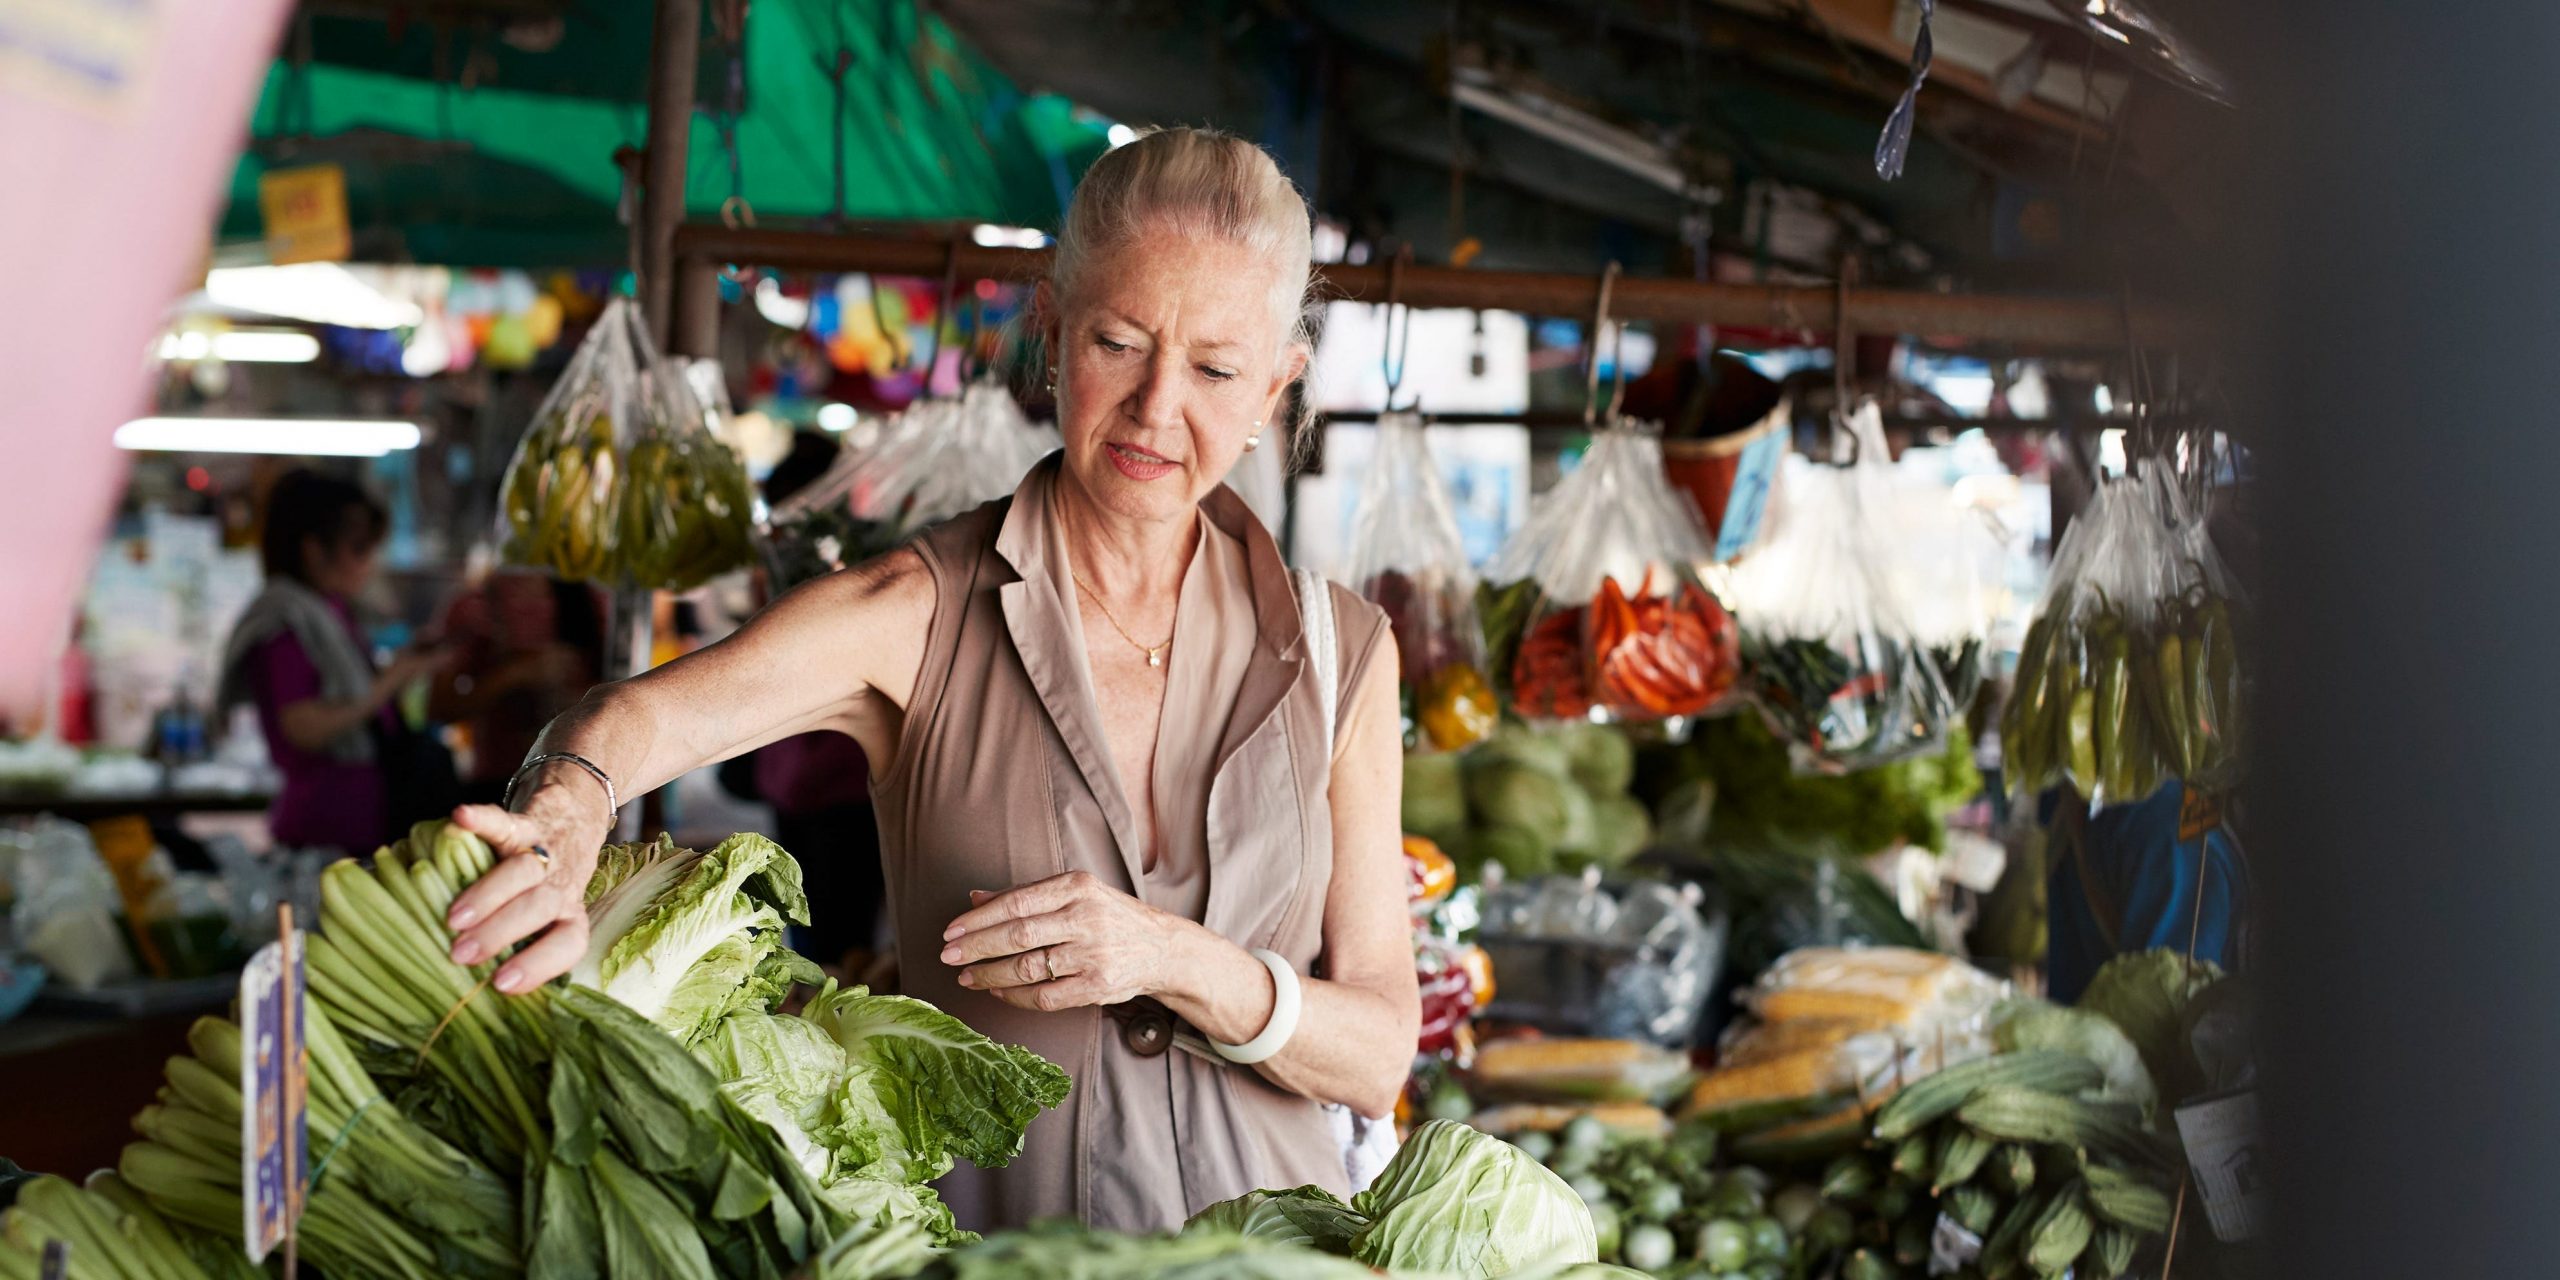 A middle-aged woman picks up leafy green vegetables at a farmer's market.